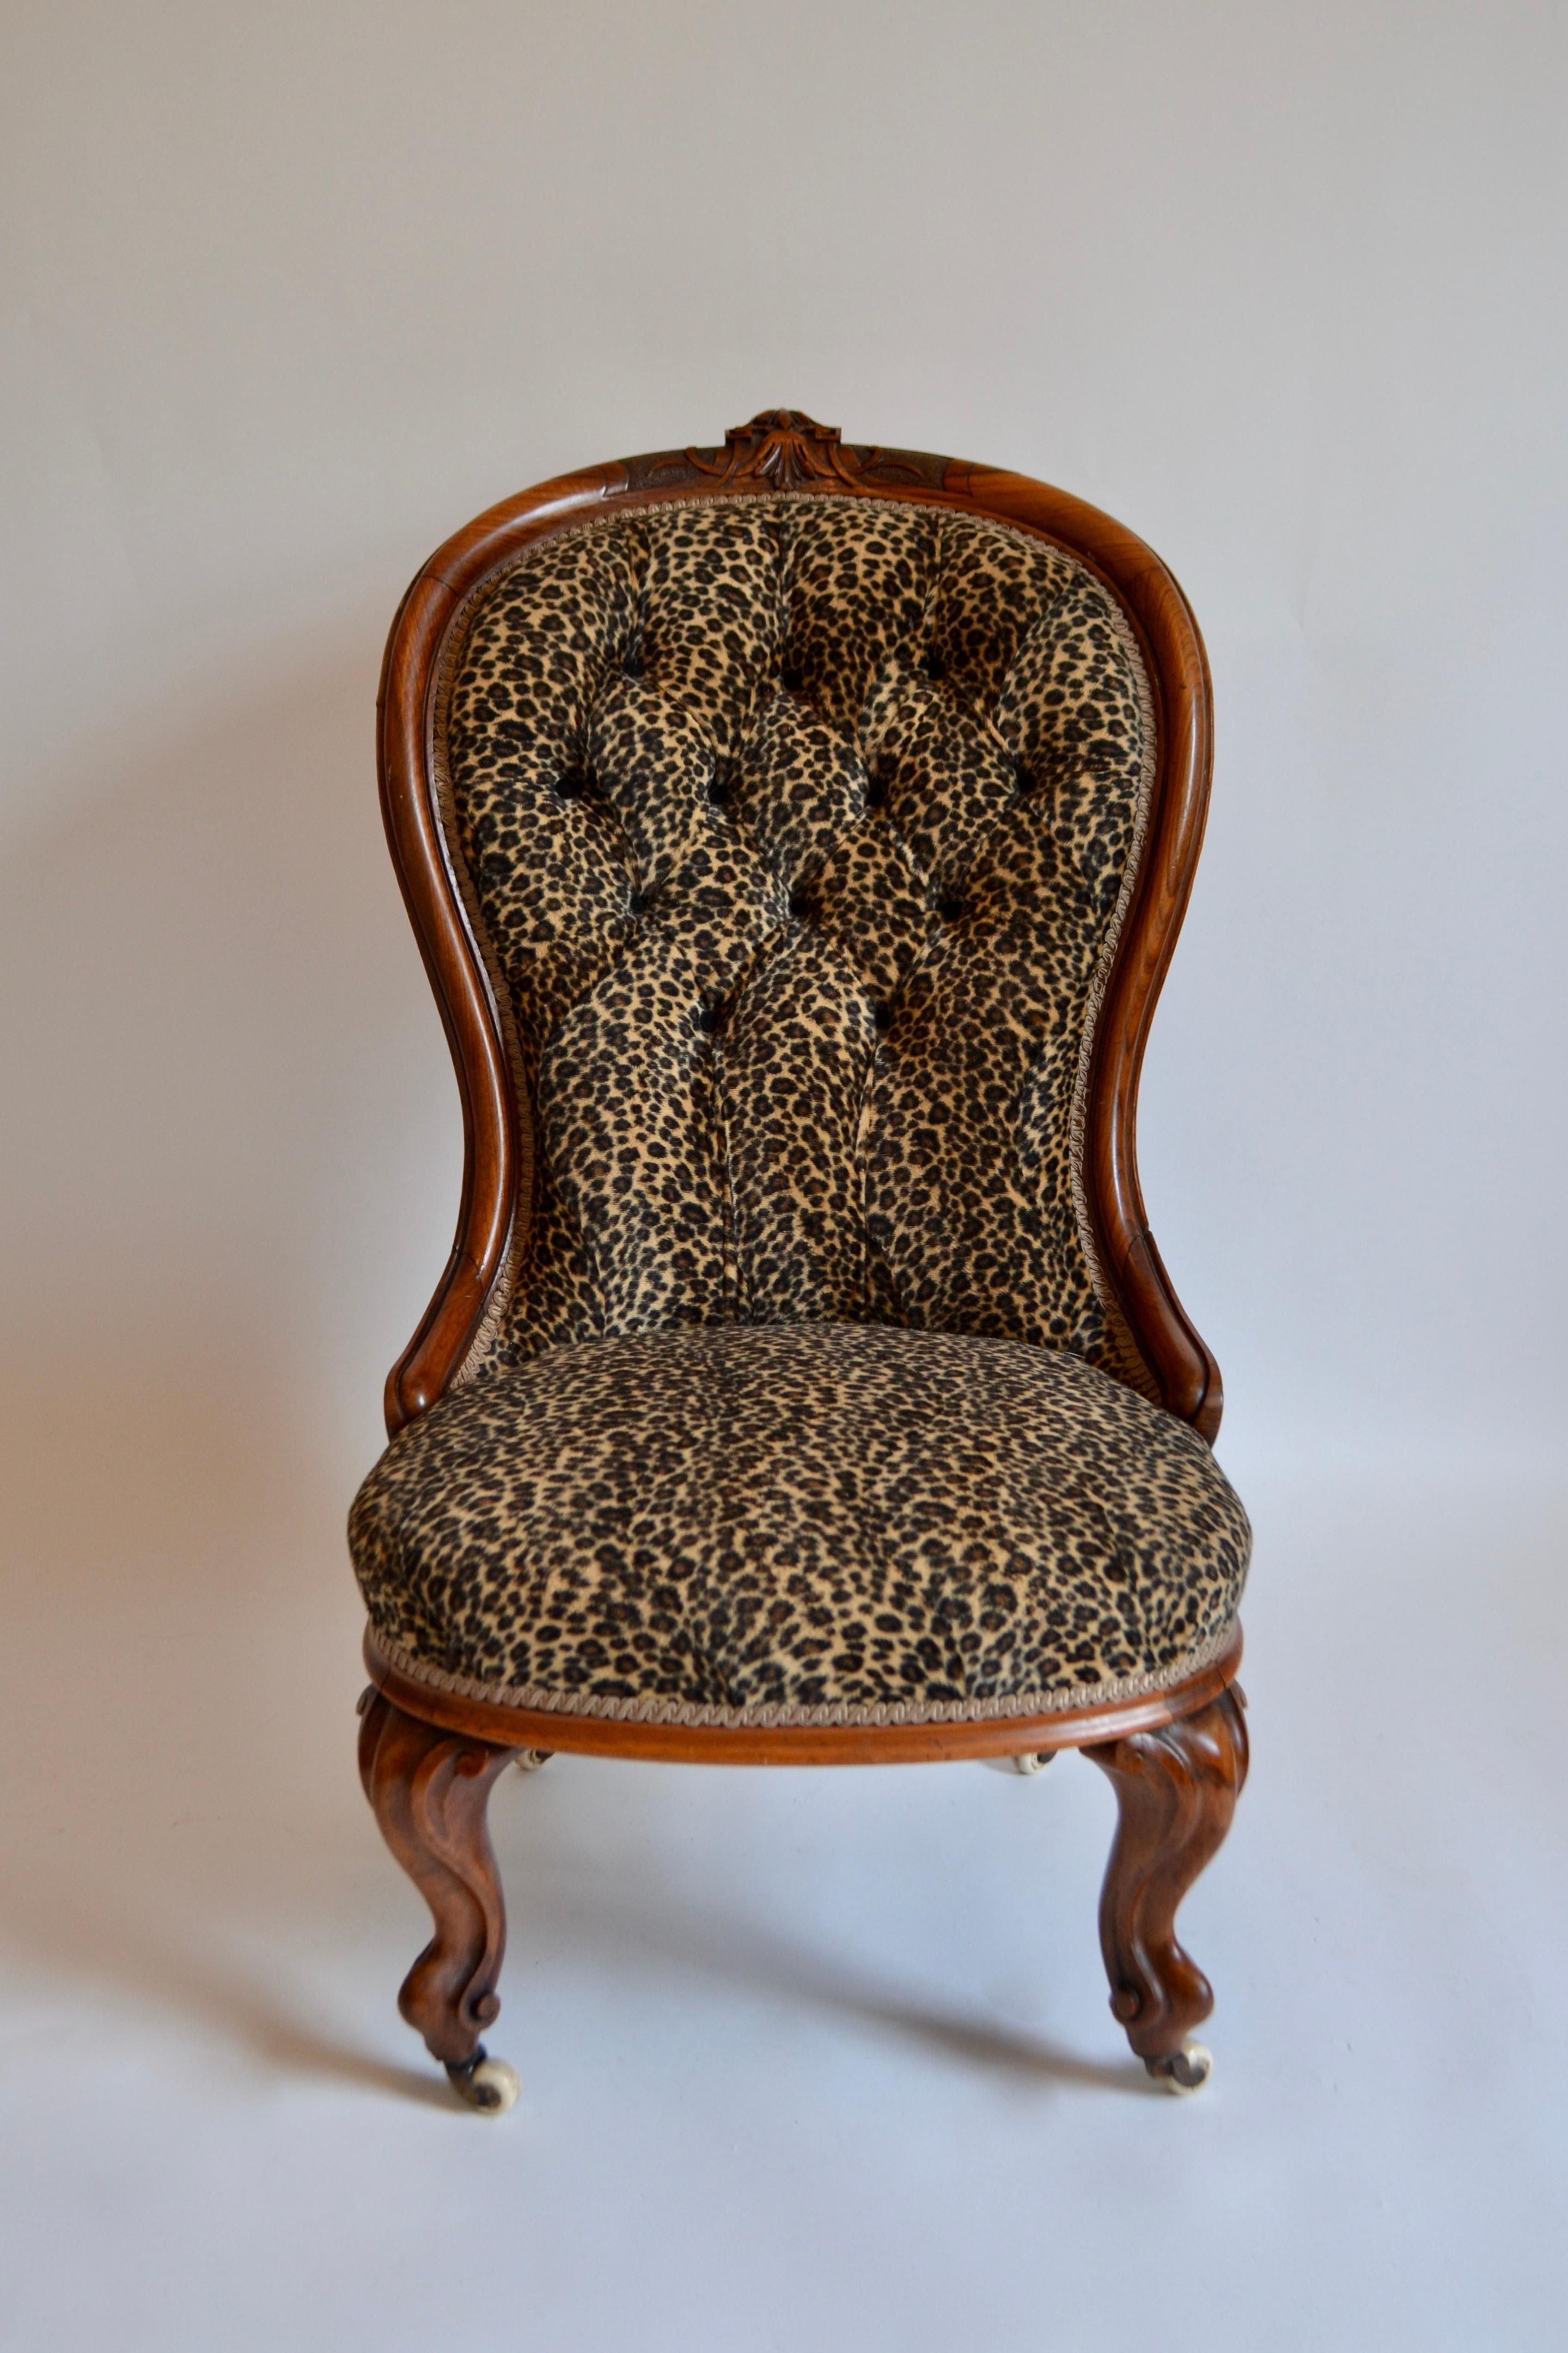 British Pair of Victorian Walnut Chairs Upholstered in Faux Leopard Skin, 19th Century For Sale